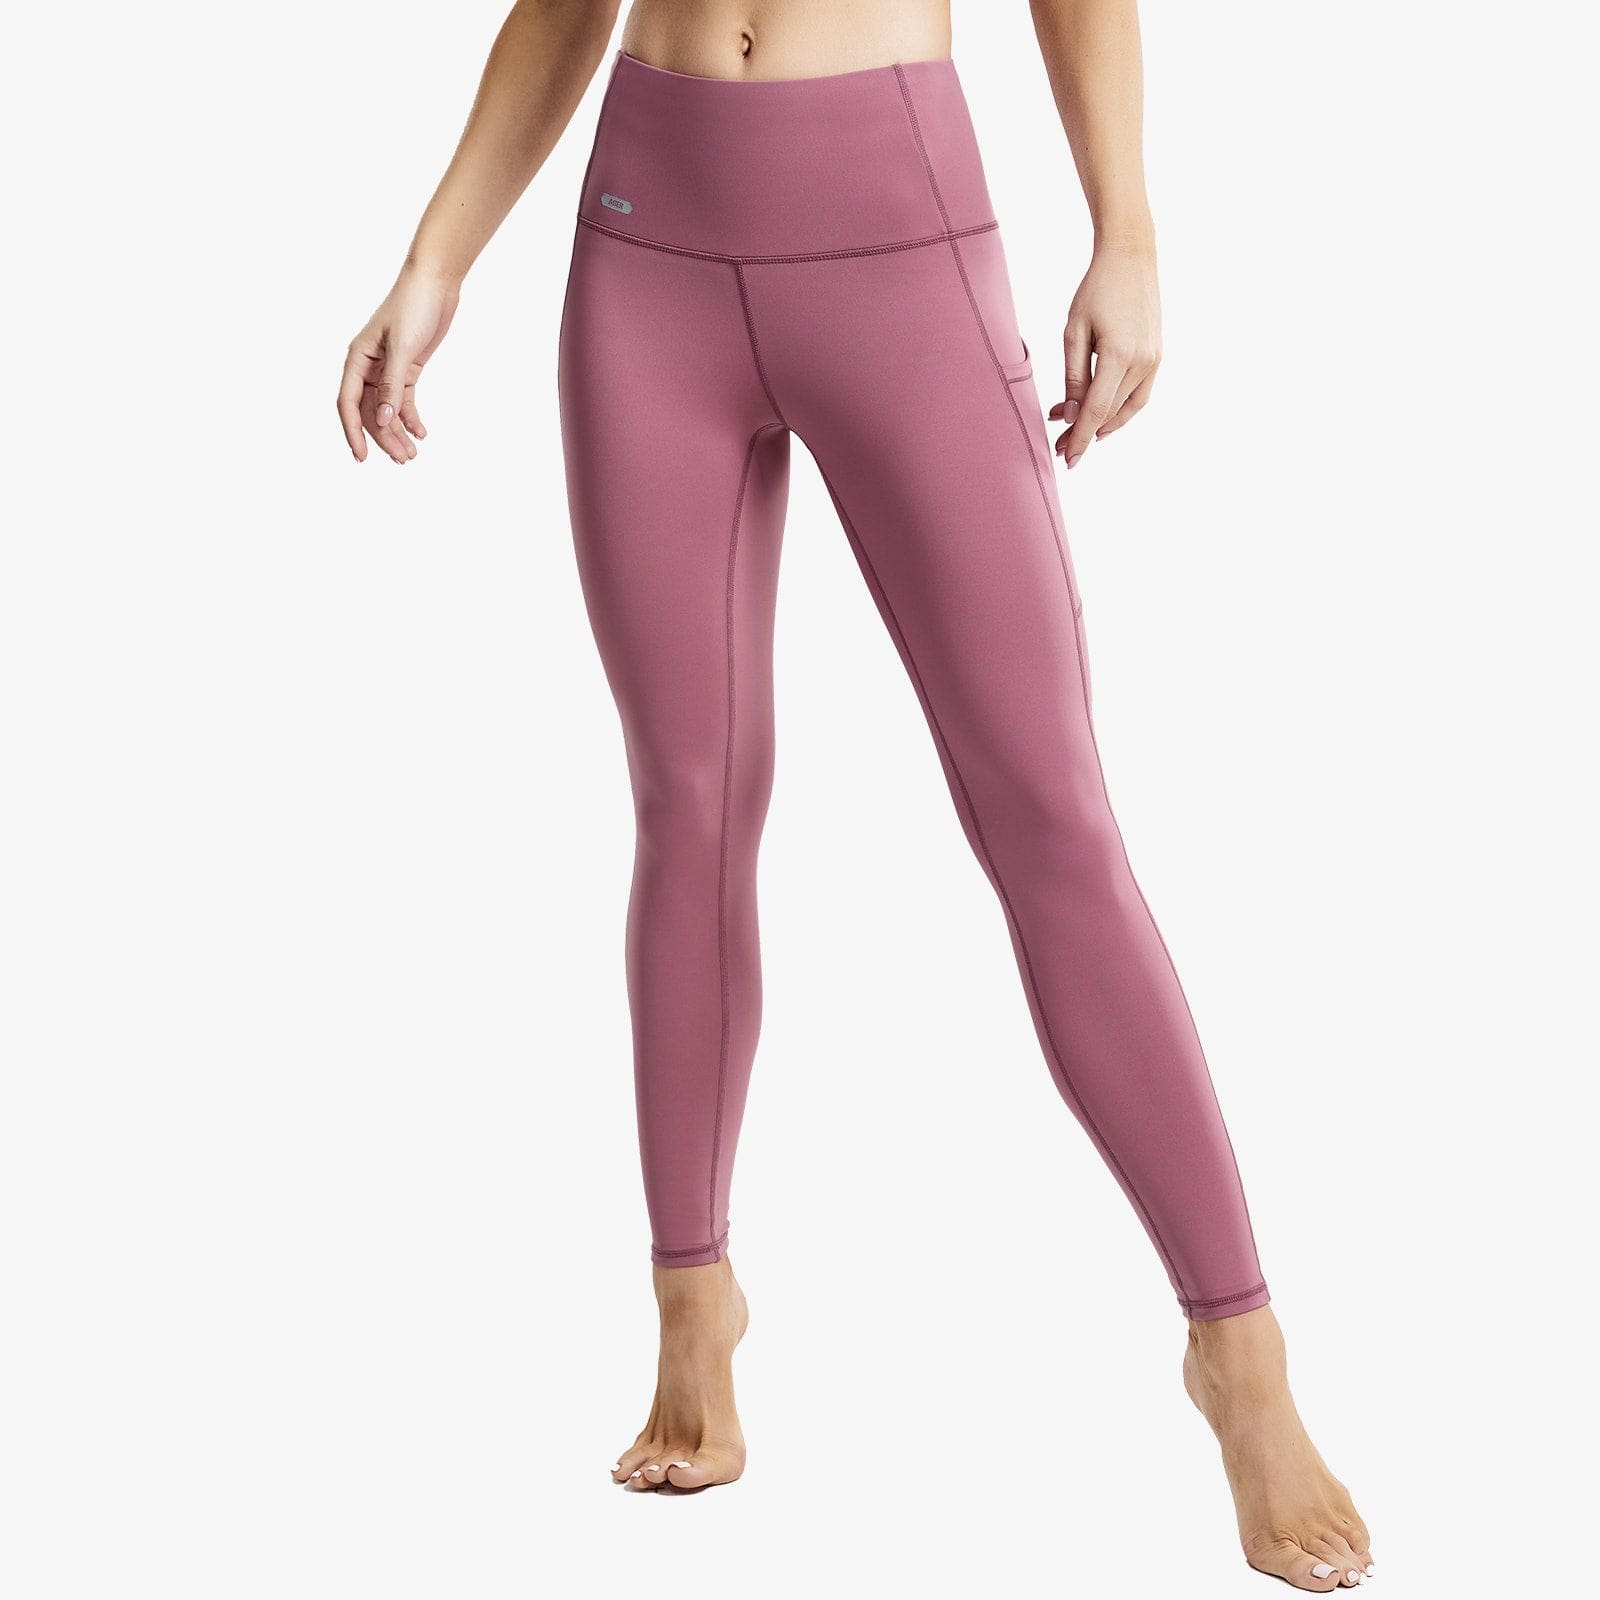 Women's High Waist Yoga Pants with Pockets, Full Length - Rose Pink / S